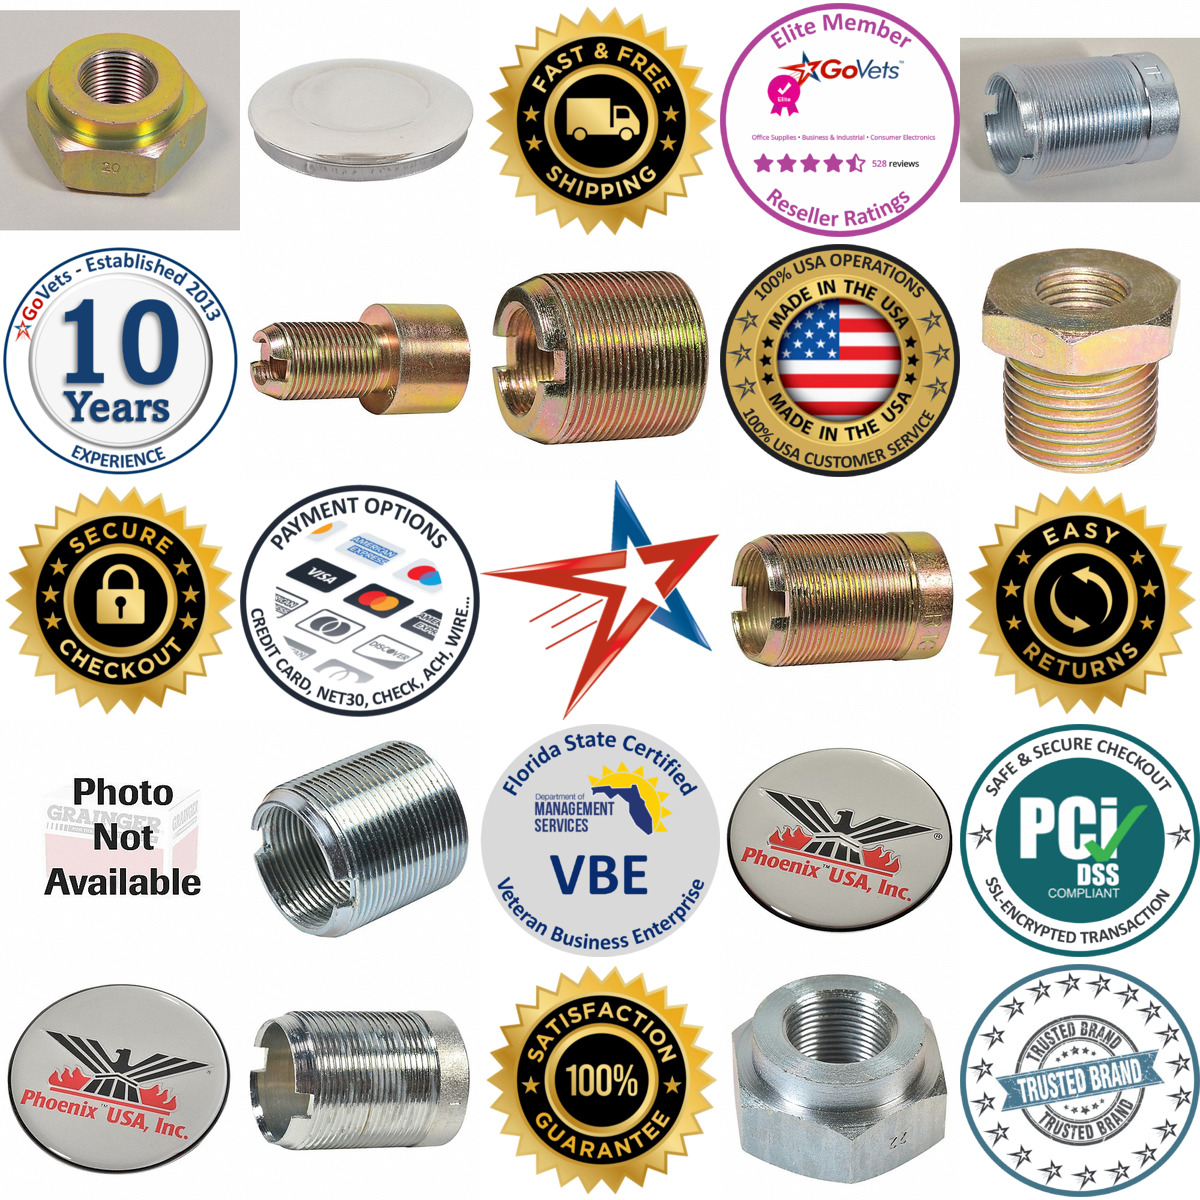 A selection of Hub Cap and Wheel Simulator Accessories and Parts products on GoVets